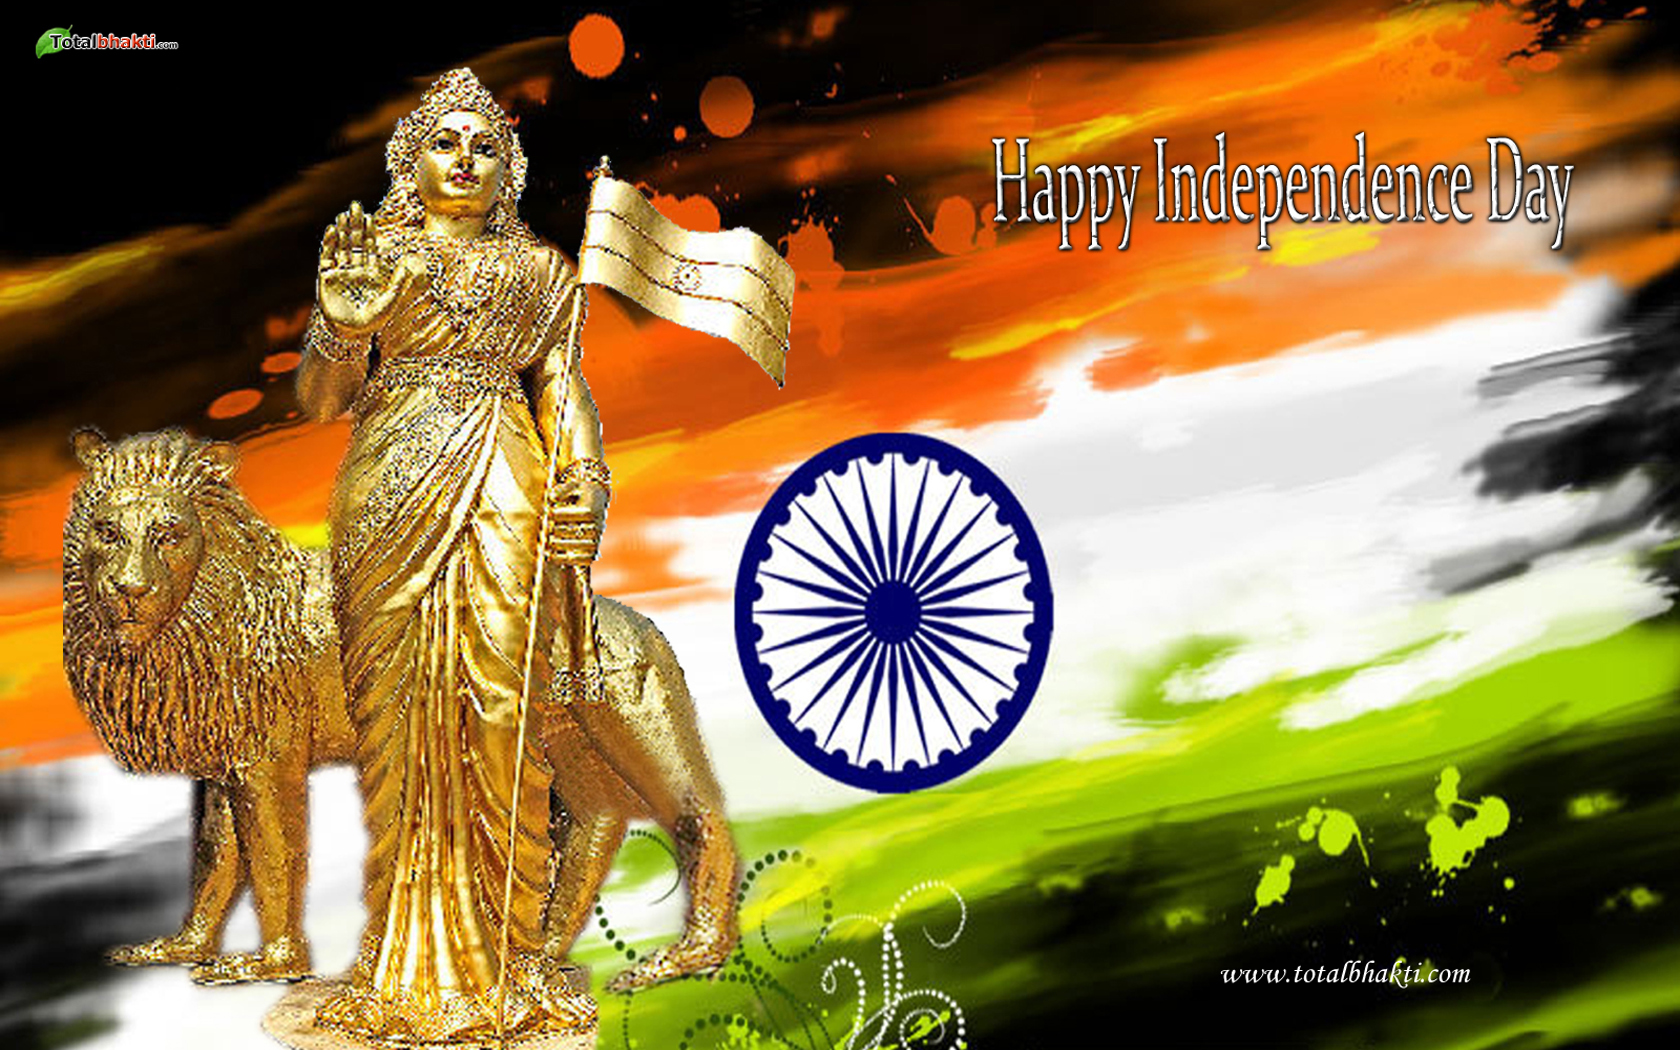 indian independence day wallpaper free download,organism,fun,graphics,graphic design,holiday